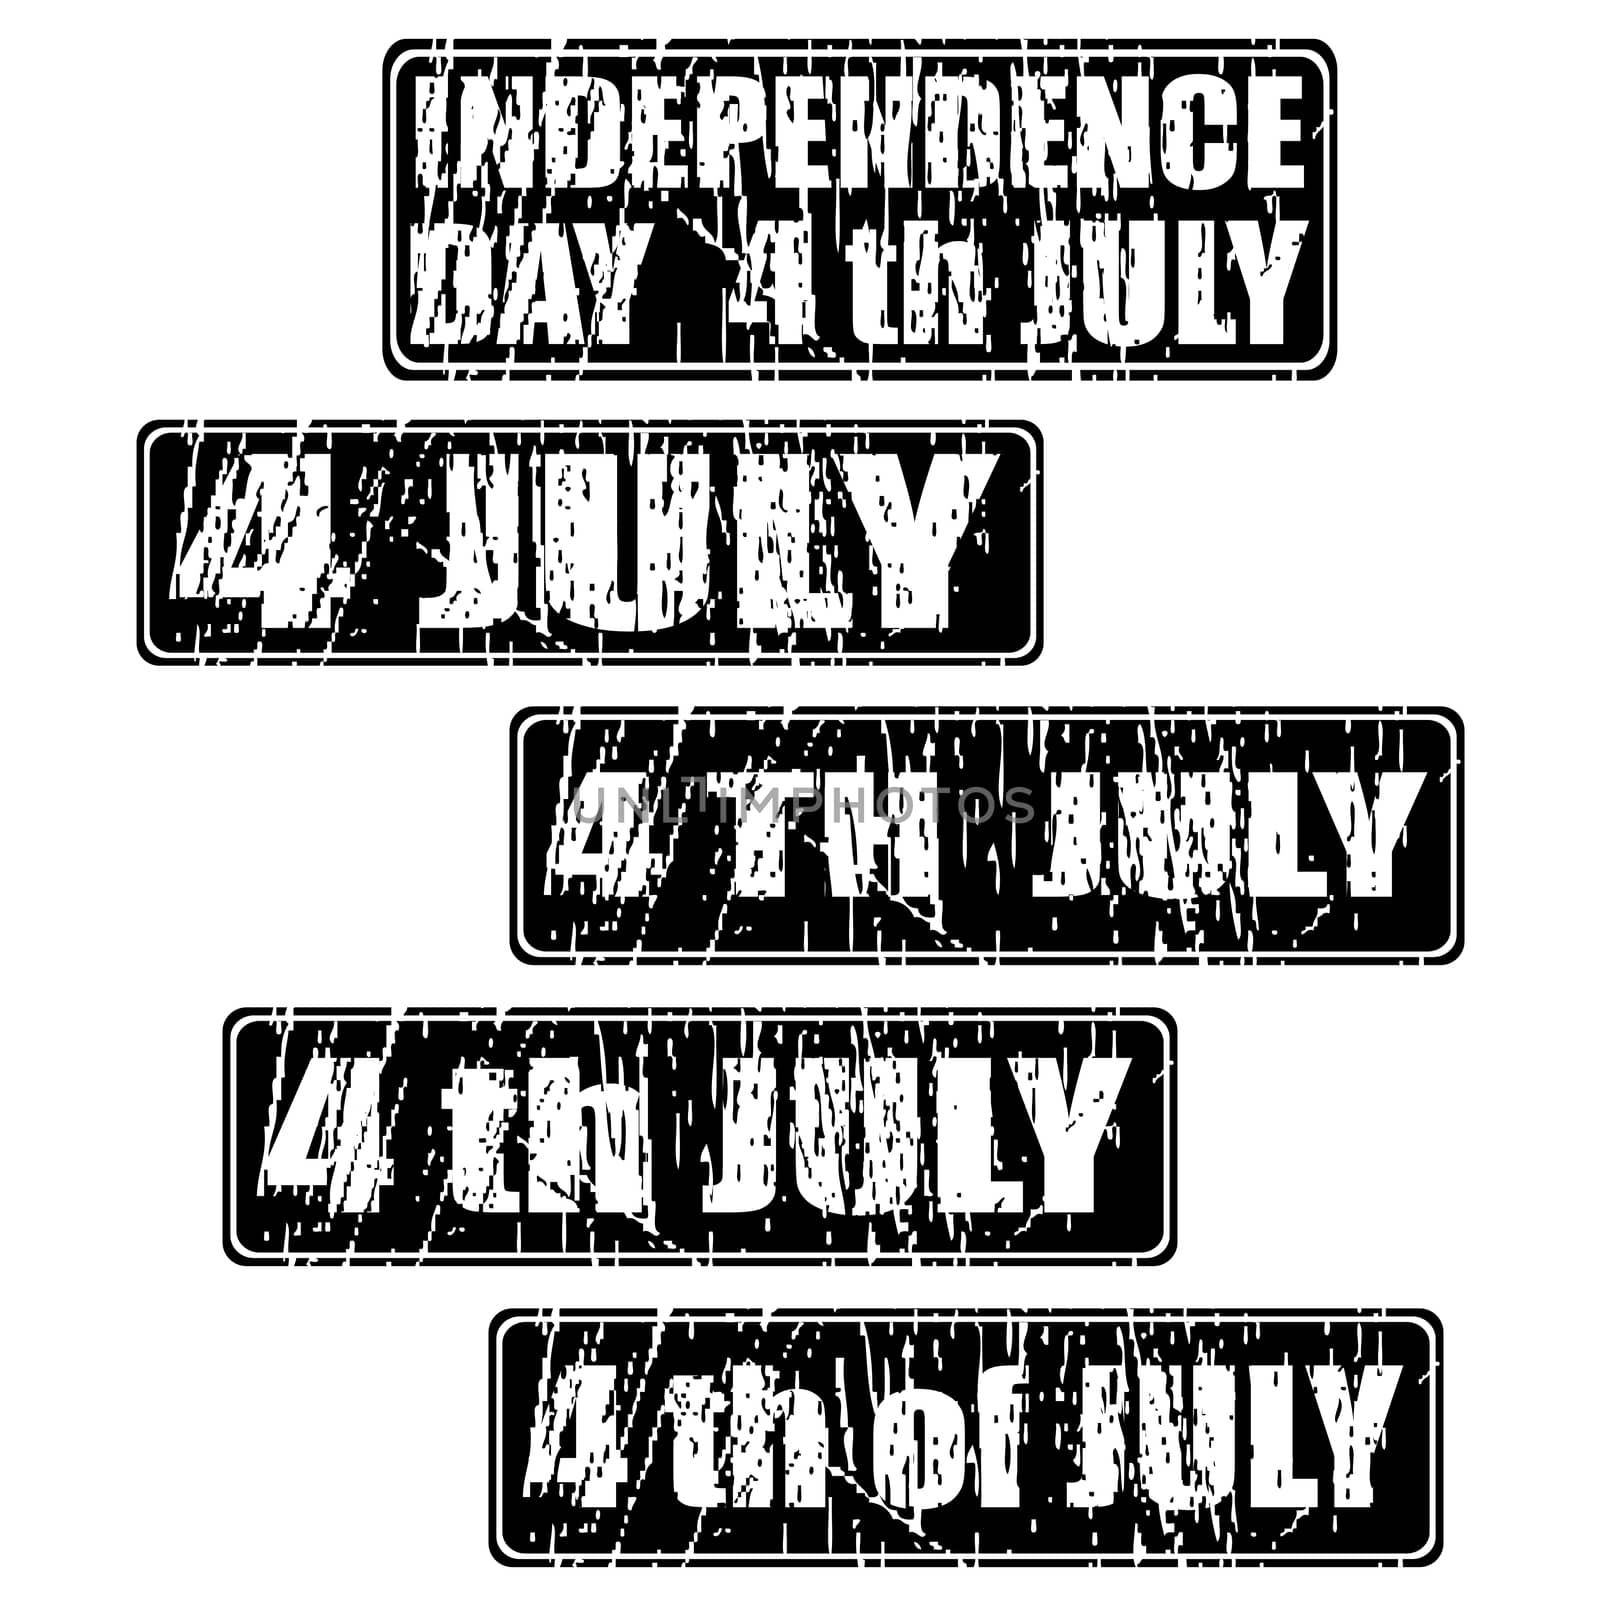 4th of July celebration rubber stamp by hibrida13